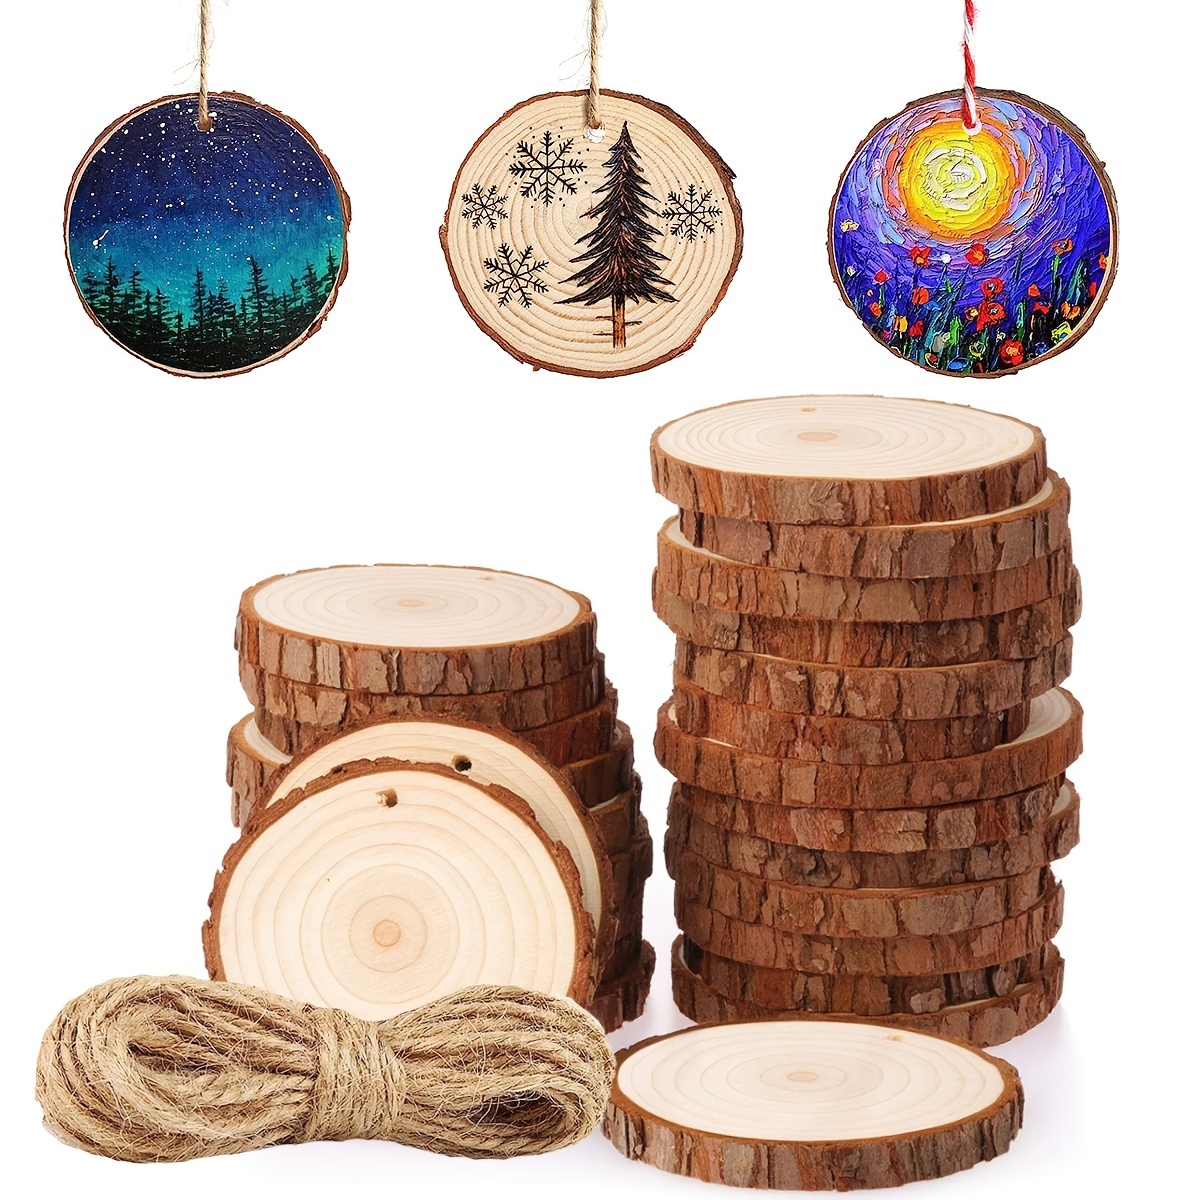 5pcs Wooden Discs, Wooden Discs For Crafts, DIY Wooden Blocks For Cricut  Projects, Door Hangers, Wood Burning, Painting, Valentine's Day Crafts, Home